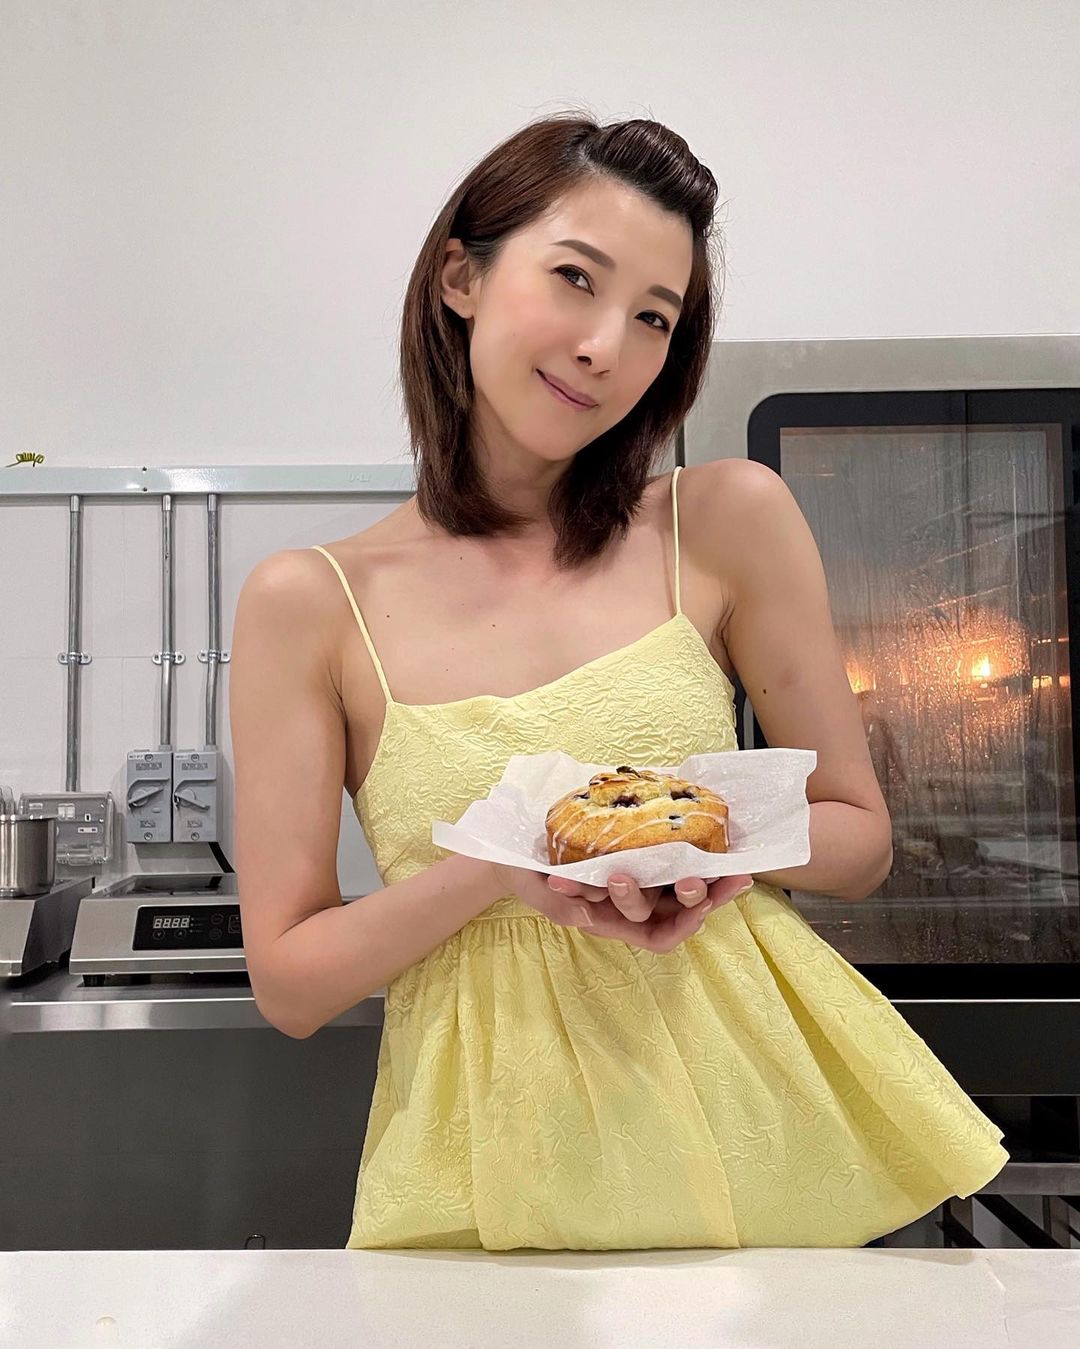 jeanette aw bakery